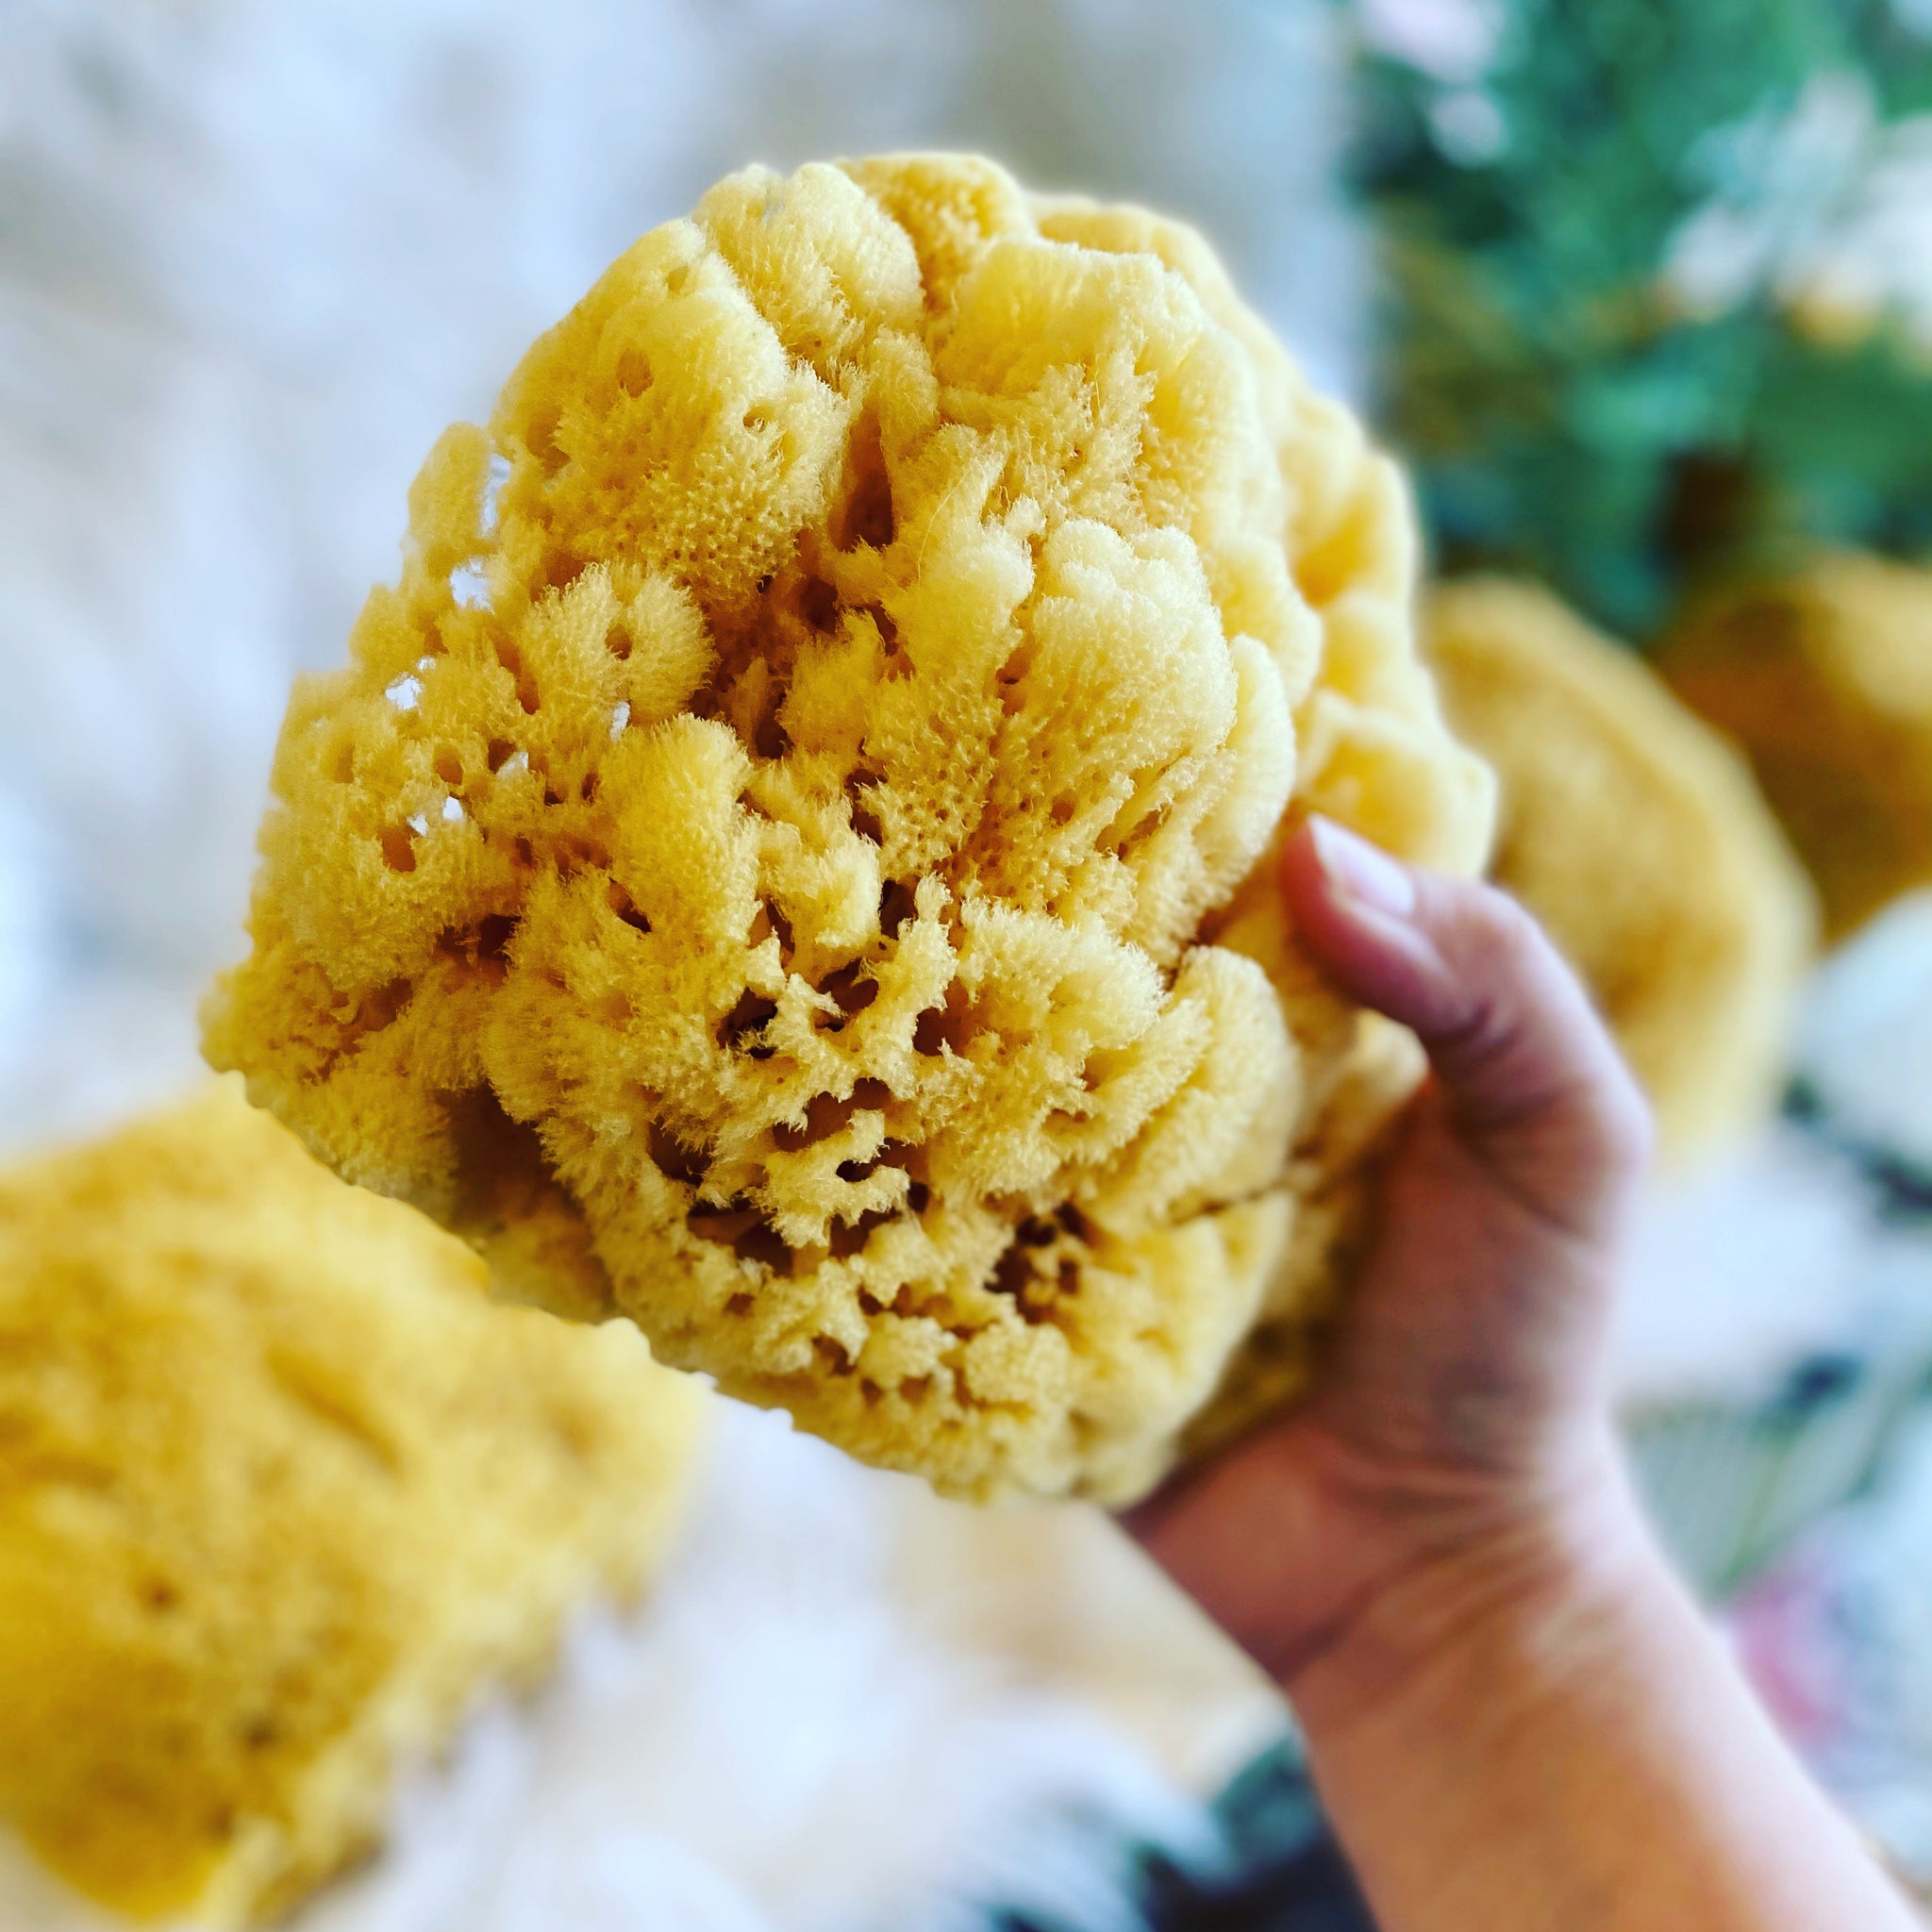 Yellow Sea Sponges for Bathing HUGE 7 to 8 inches in diameter